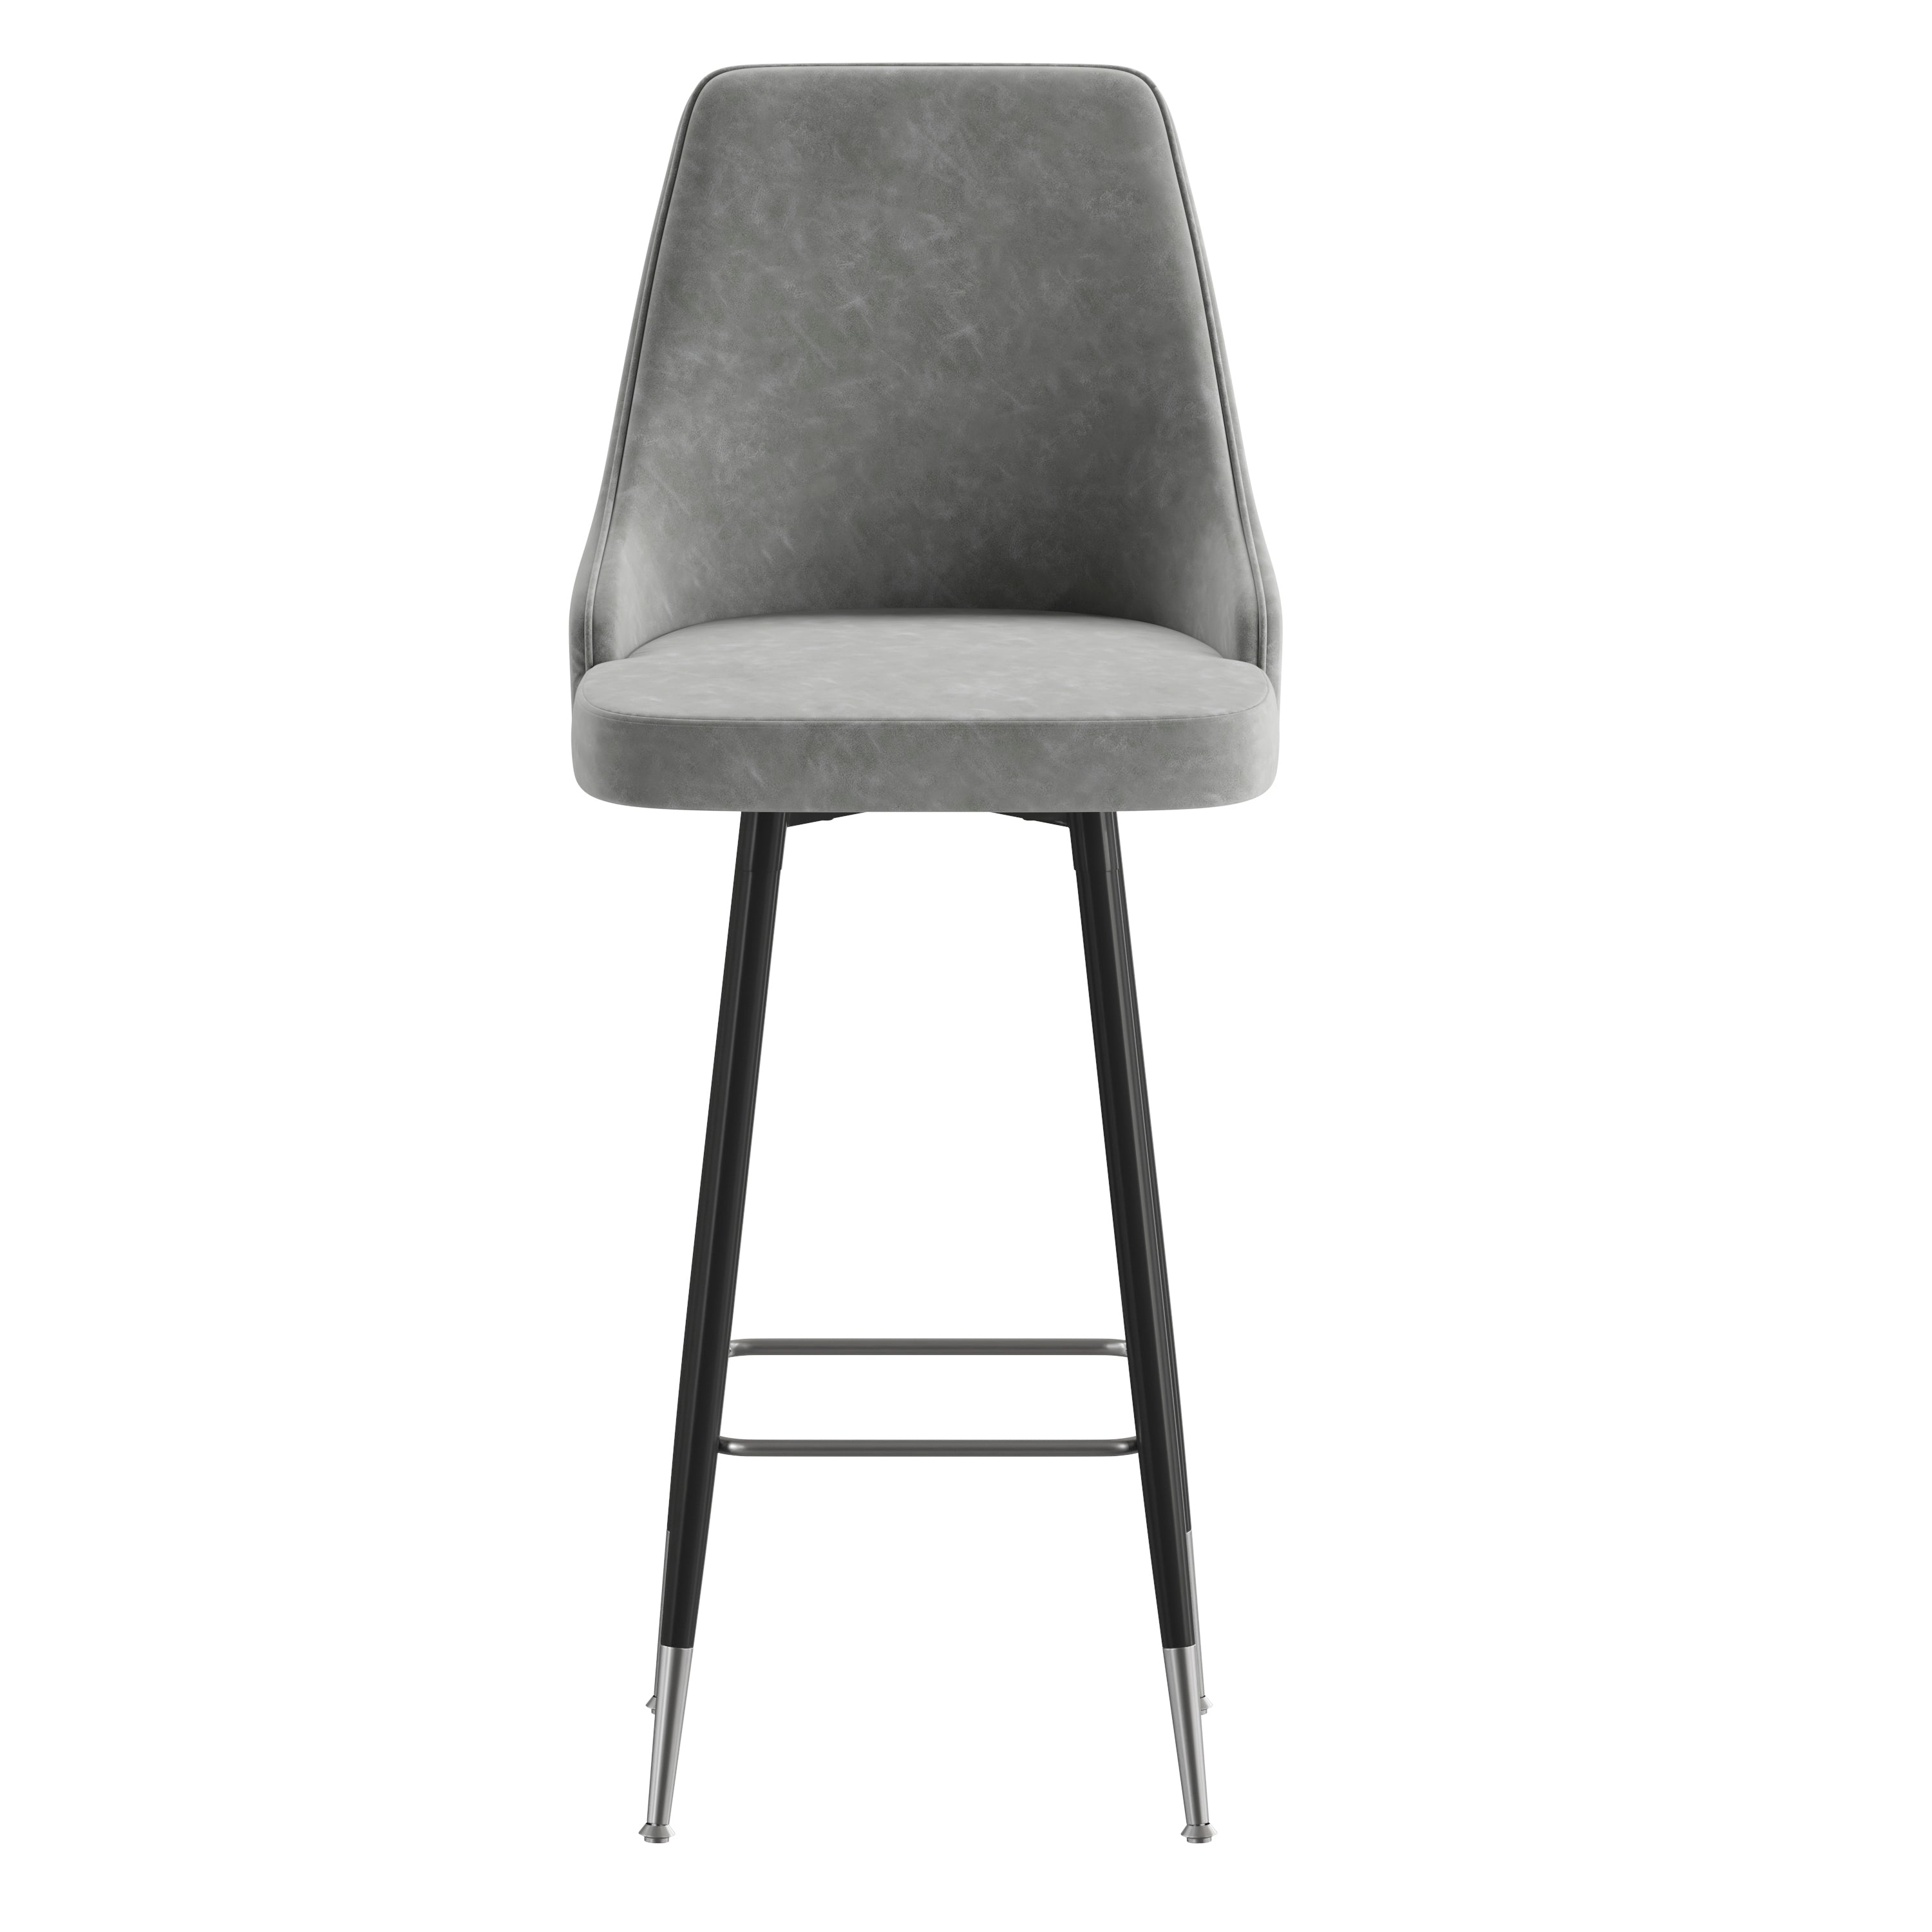 Shelly Set of 2 Commercial LeatherSoft Bar Height Stools with Solid Black Metal Frames and Chrome Accented Feet and Footrests-Barstool-Flash Furniture-Wall2Wall Furnishings